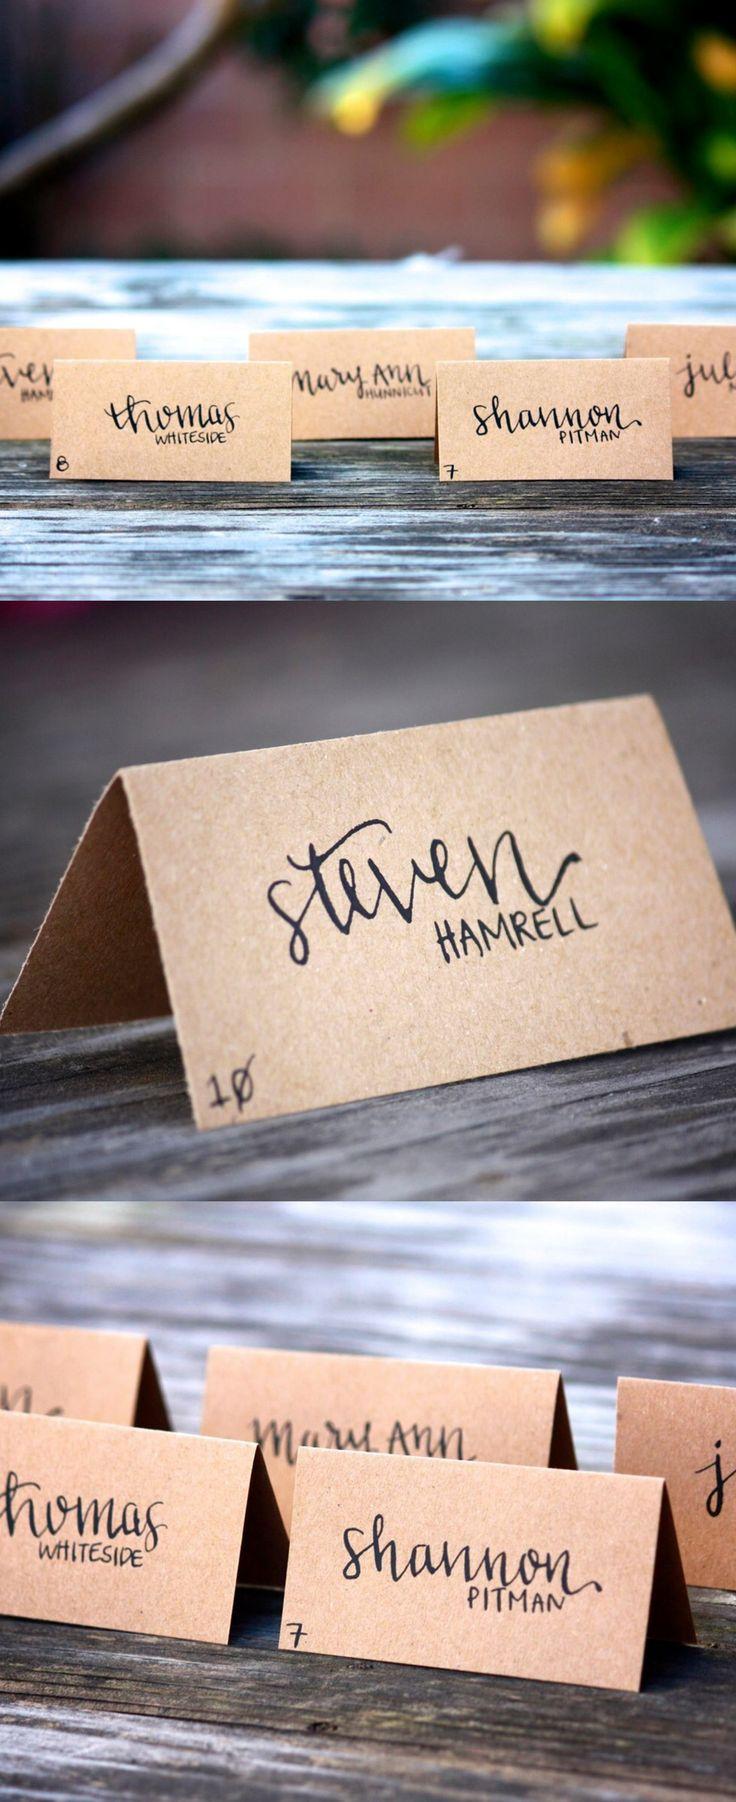 Wedding - Wedding Place Cards - Tent Fold - Escort Card - Black Calligraphy With Kraft Paper - Dinner Party - Name Tag